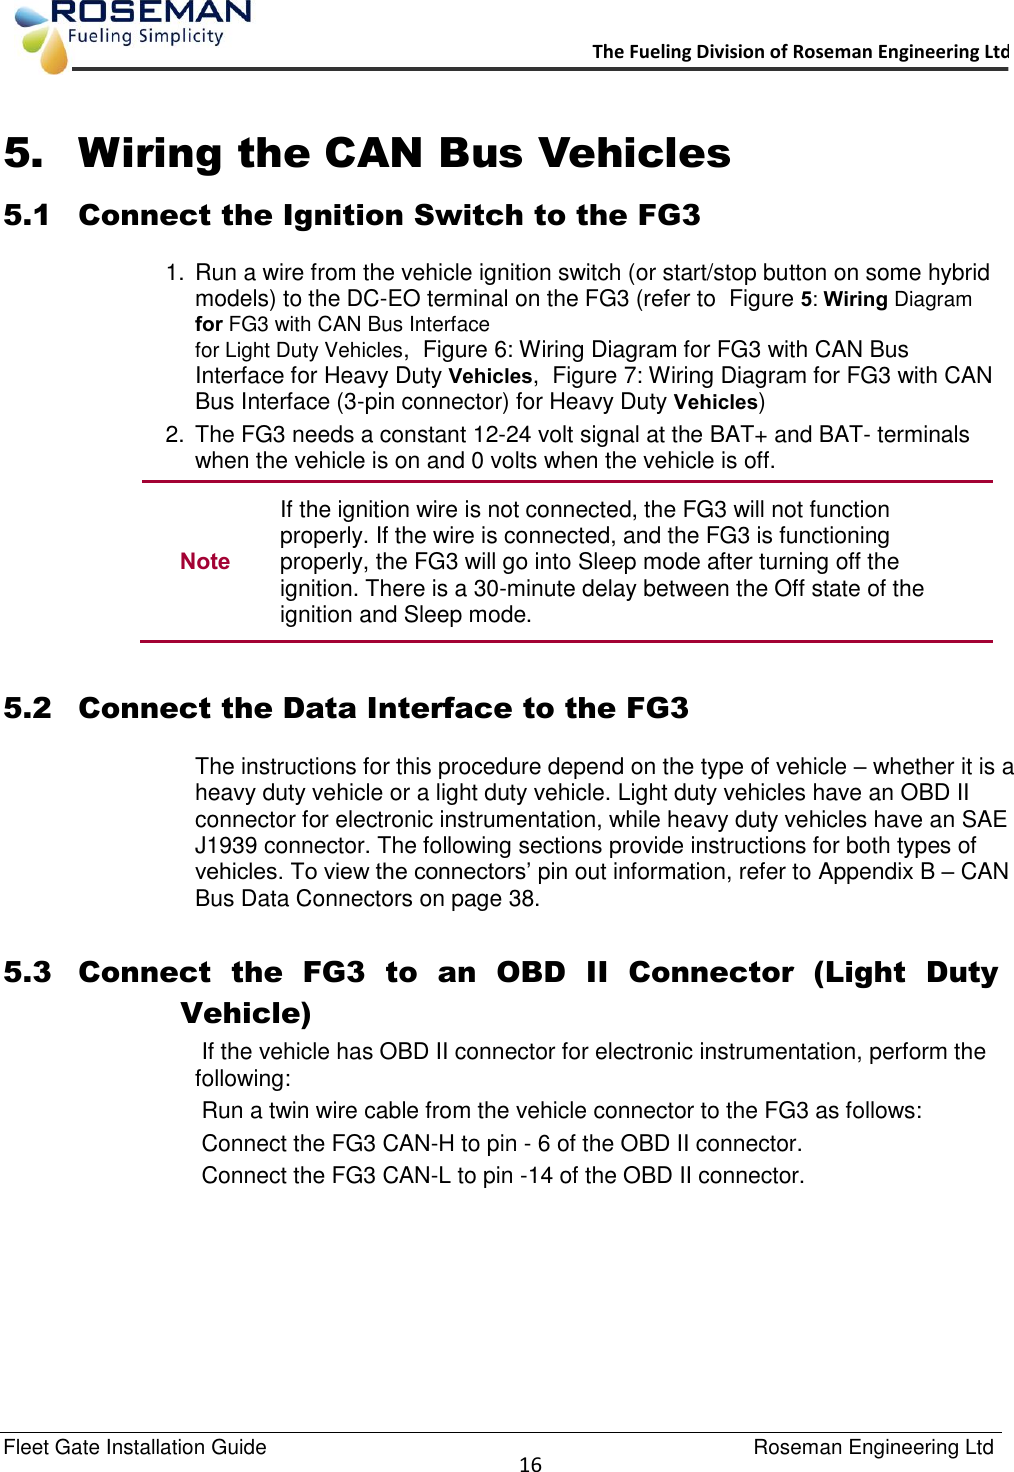   Fleet Gate Installation Guide                                                                                    Roseman Engineering Ltd  16      The Fueling Division of Roseman Engineering Ltd.                                                                 5. Wiring the CAN Bus Vehicles 5.1 Connect the Ignition Switch to the FG3 1.  Run a wire from the vehicle ignition switch (or start/stop button on some hybrid models) to the DC-EO terminal on the FG3 (refer to  Figure 5: Wiring Diagram for FG3 with CAN Bus Interface  for Light Duty Vehicles,  Figure 6: Wiring Diagram for FG3 with CAN Bus Interface for Heavy Duty Vehicles,  Figure 7: Wiring Diagram for FG3 with CAN Bus Interface (3-pin connector) for Heavy Duty Vehicles) 2.  The FG3 needs a constant 12-24 volt signal at the BAT+ and BAT- terminals when the vehicle is on and 0 volts when the vehicle is off. Note If the ignition wire is not connected, the FG3 will not function properly. If the wire is connected, and the FG3 is functioning properly, the FG3 will go into Sleep mode after turning off the ignition. There is a 30-minute delay between the Off state of the ignition and Sleep mode.   5.2 Connect the Data Interface to the FG3 The instructions for this procedure depend on the type of vehicle – whether it is a heavy duty vehicle or a light duty vehicle. Light duty vehicles have an OBD II connector for electronic instrumentation, while heavy duty vehicles have an SAE J1939 connector. The following sections provide instructions for both types of vehicles. To view the connectors’ pin out information, refer to Appendix B – CAN Bus Data Connectors on page 38.  5.3 Connect  the  FG3  to  an  OBD  II  Connector  (Light  Duty Vehicle)  If the vehicle has OBD II connector for electronic instrumentation, perform the following:  Run a twin wire cable from the vehicle connector to the FG3 as follows:  Connect the FG3 CAN-H to pin - 6 of the OBD II connector.  Connect the FG3 CAN-L to pin -14 of the OBD II connector. 